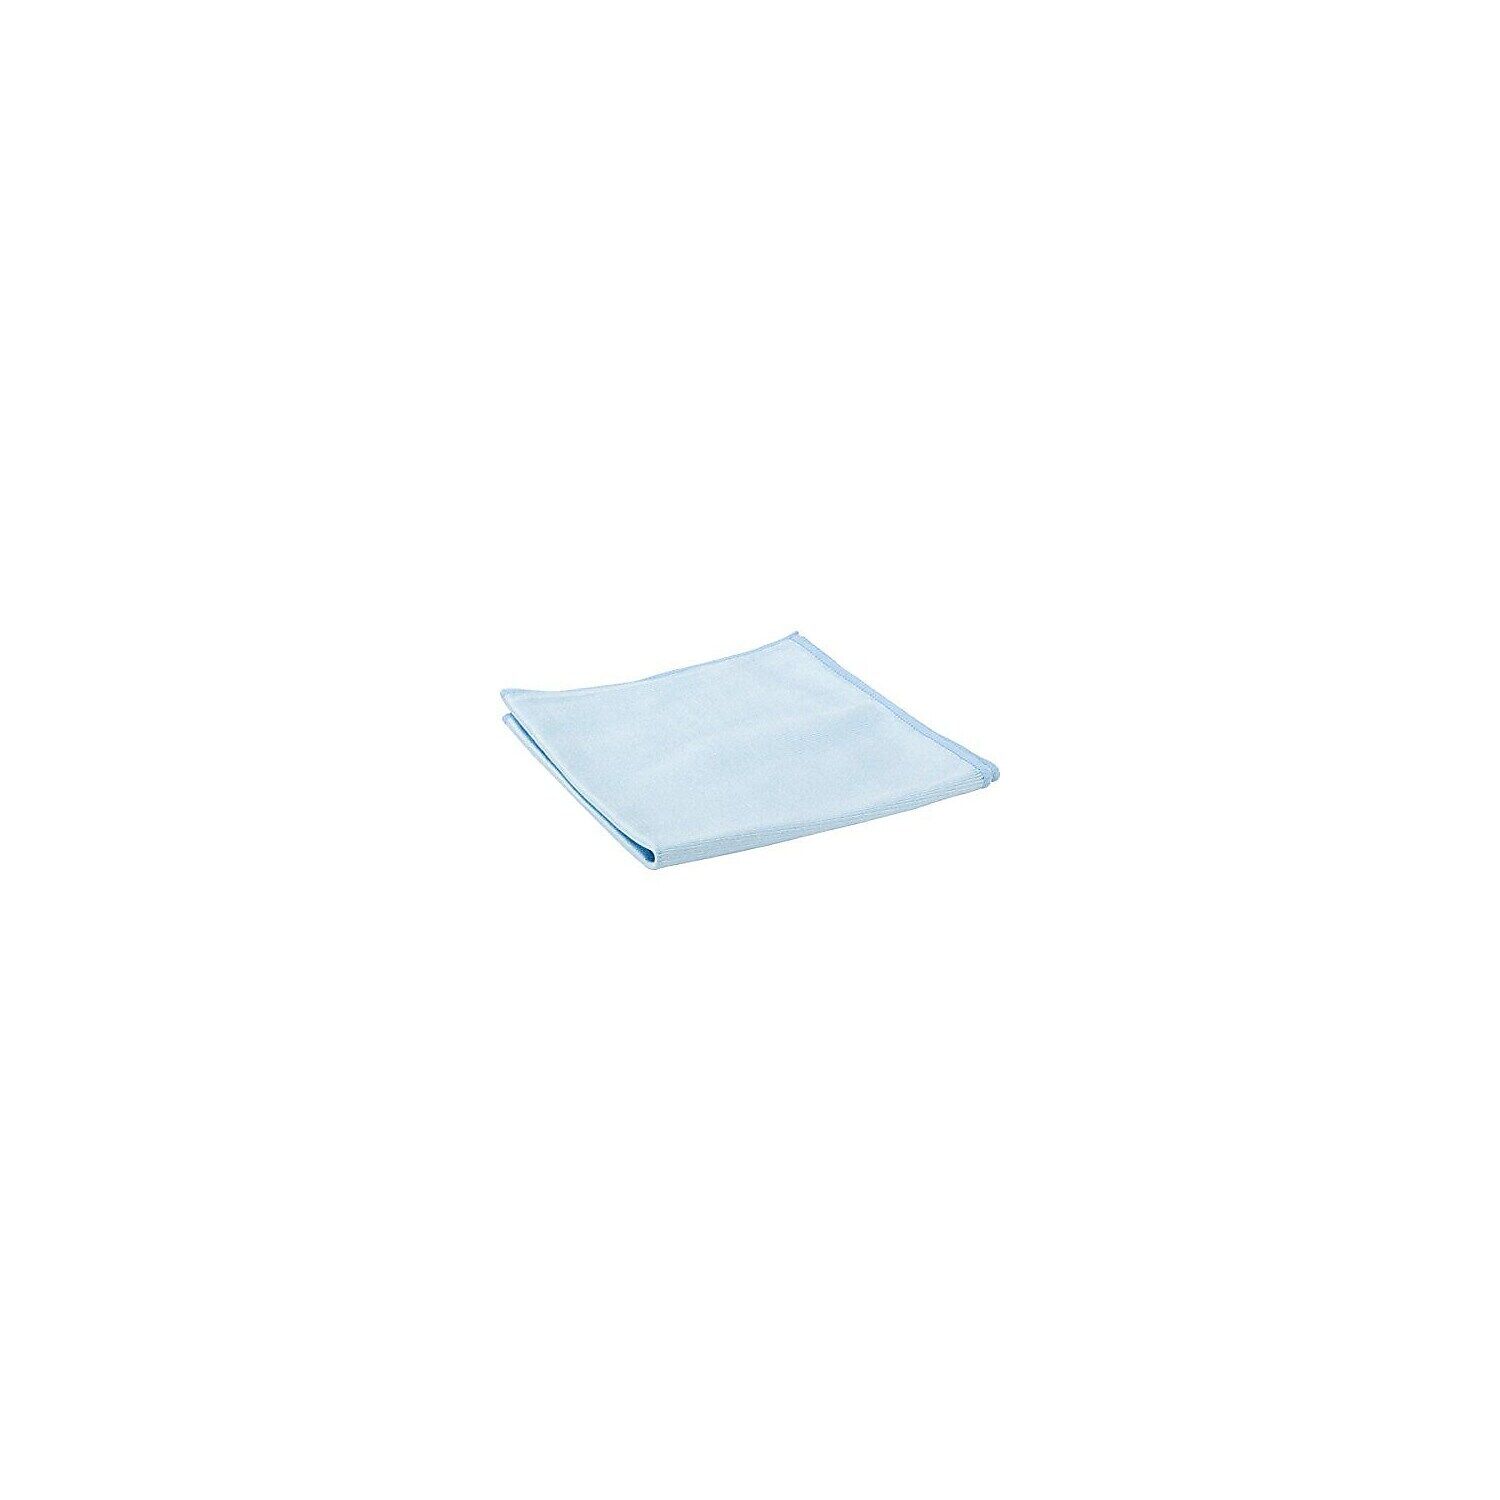 Zwipes 16 X 16"" Microfiber Glass Cloth Package Of 12 (h1-730)